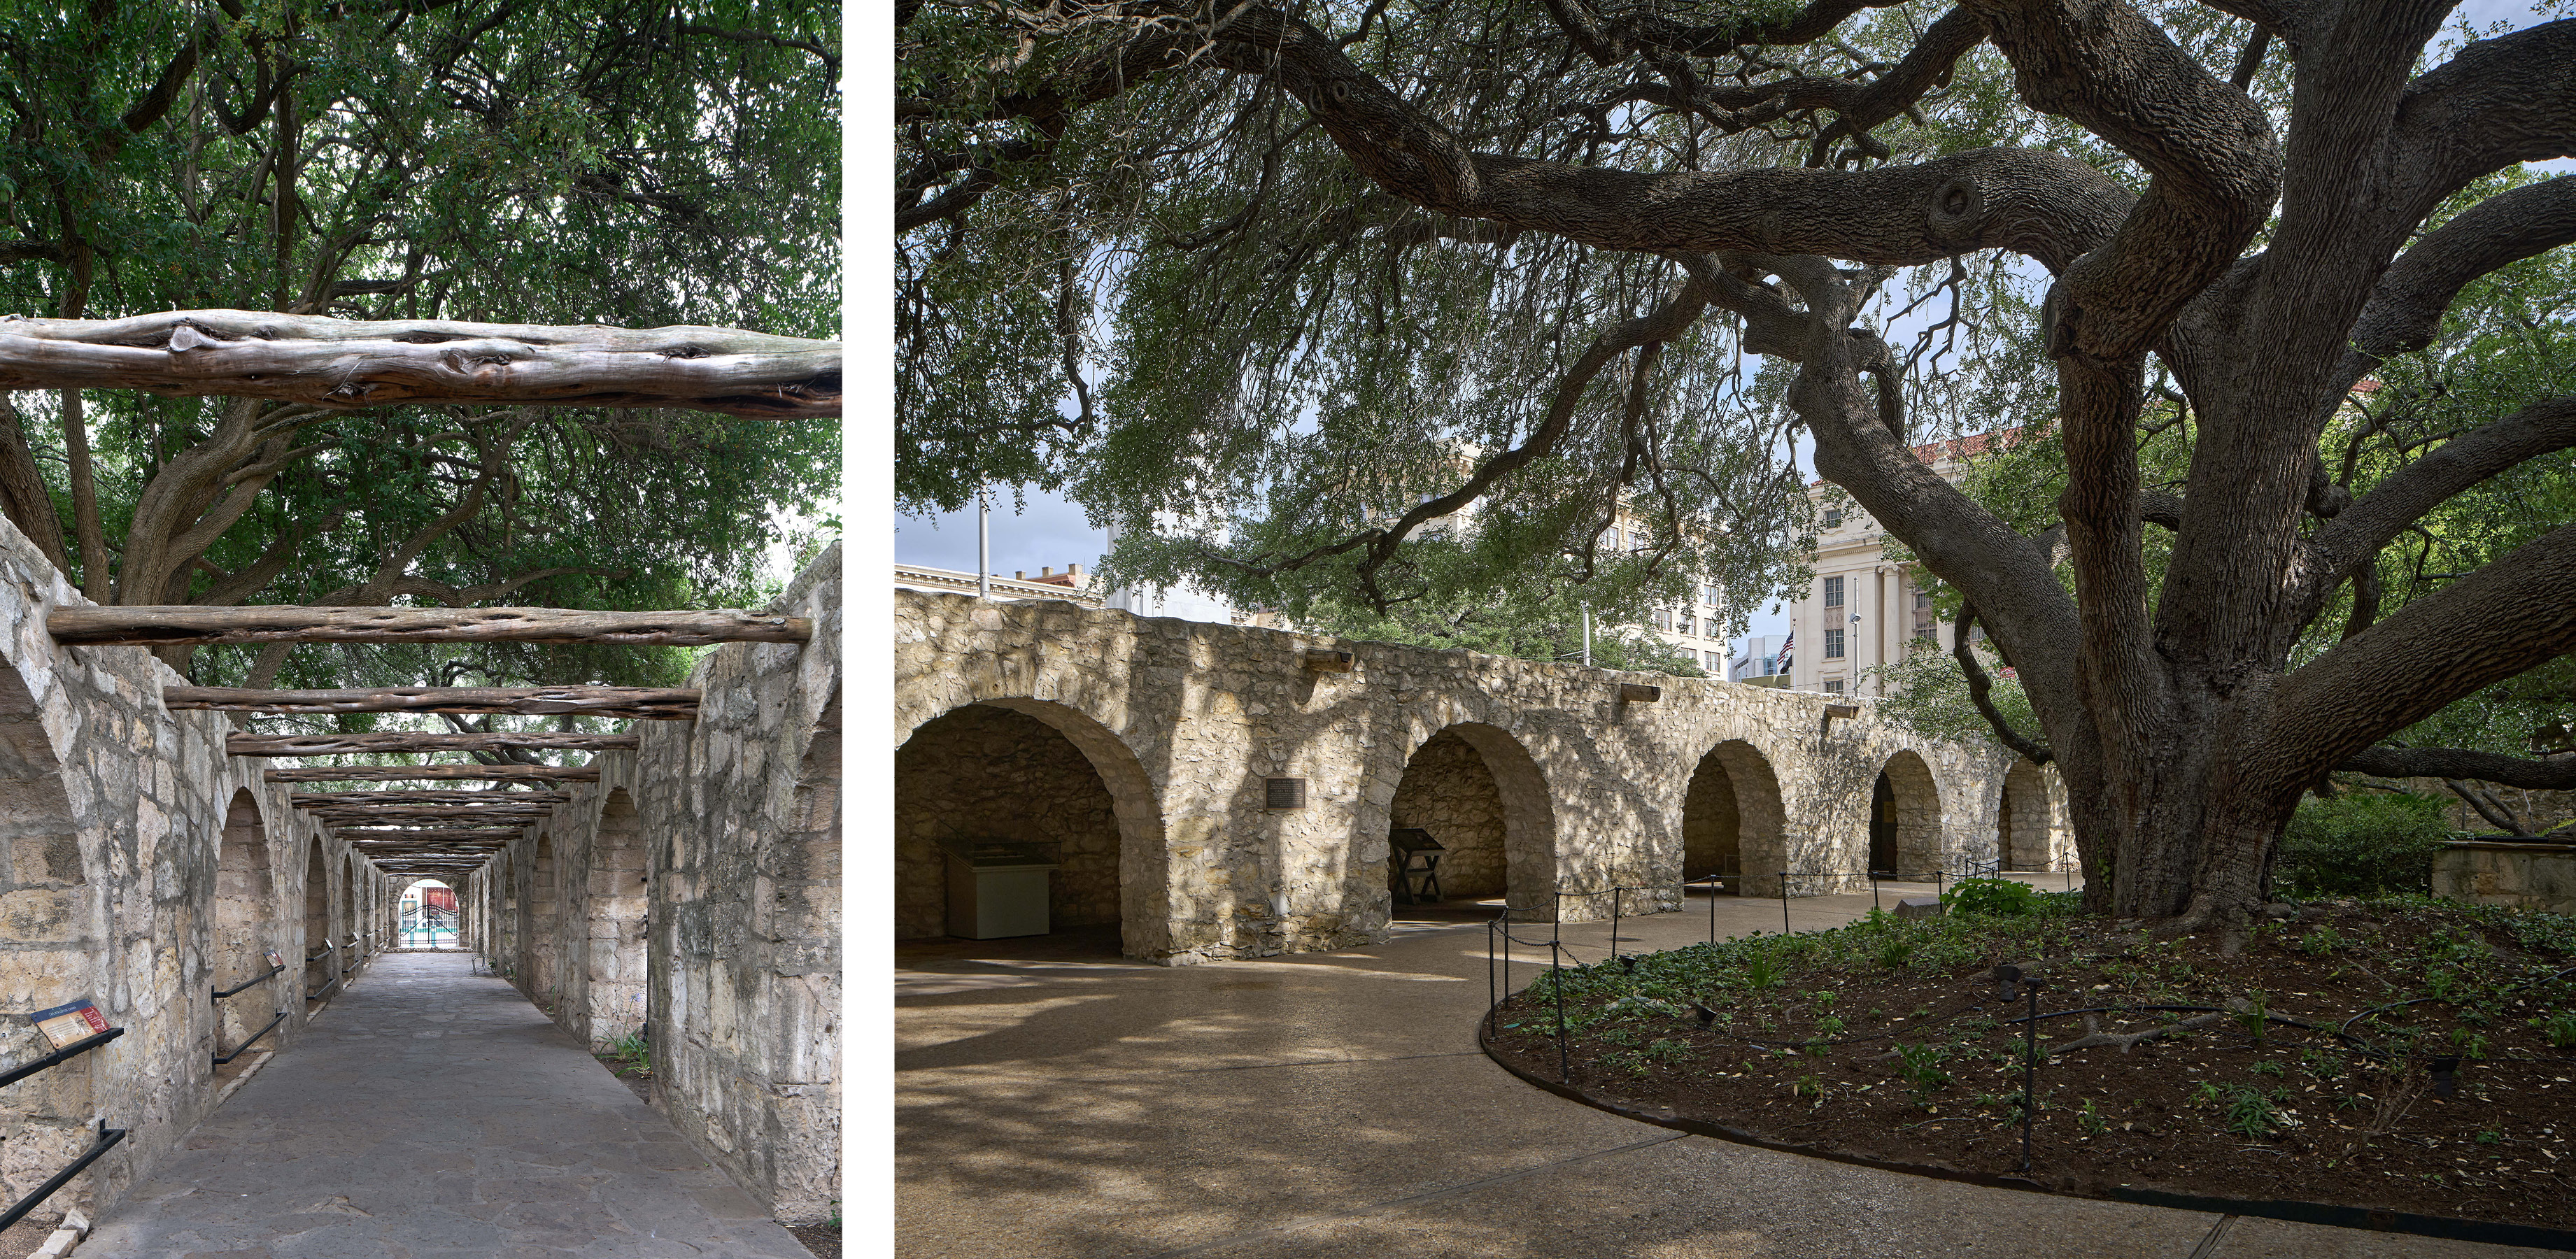 Two photos of the outside arches amongst the trees at the Alamo